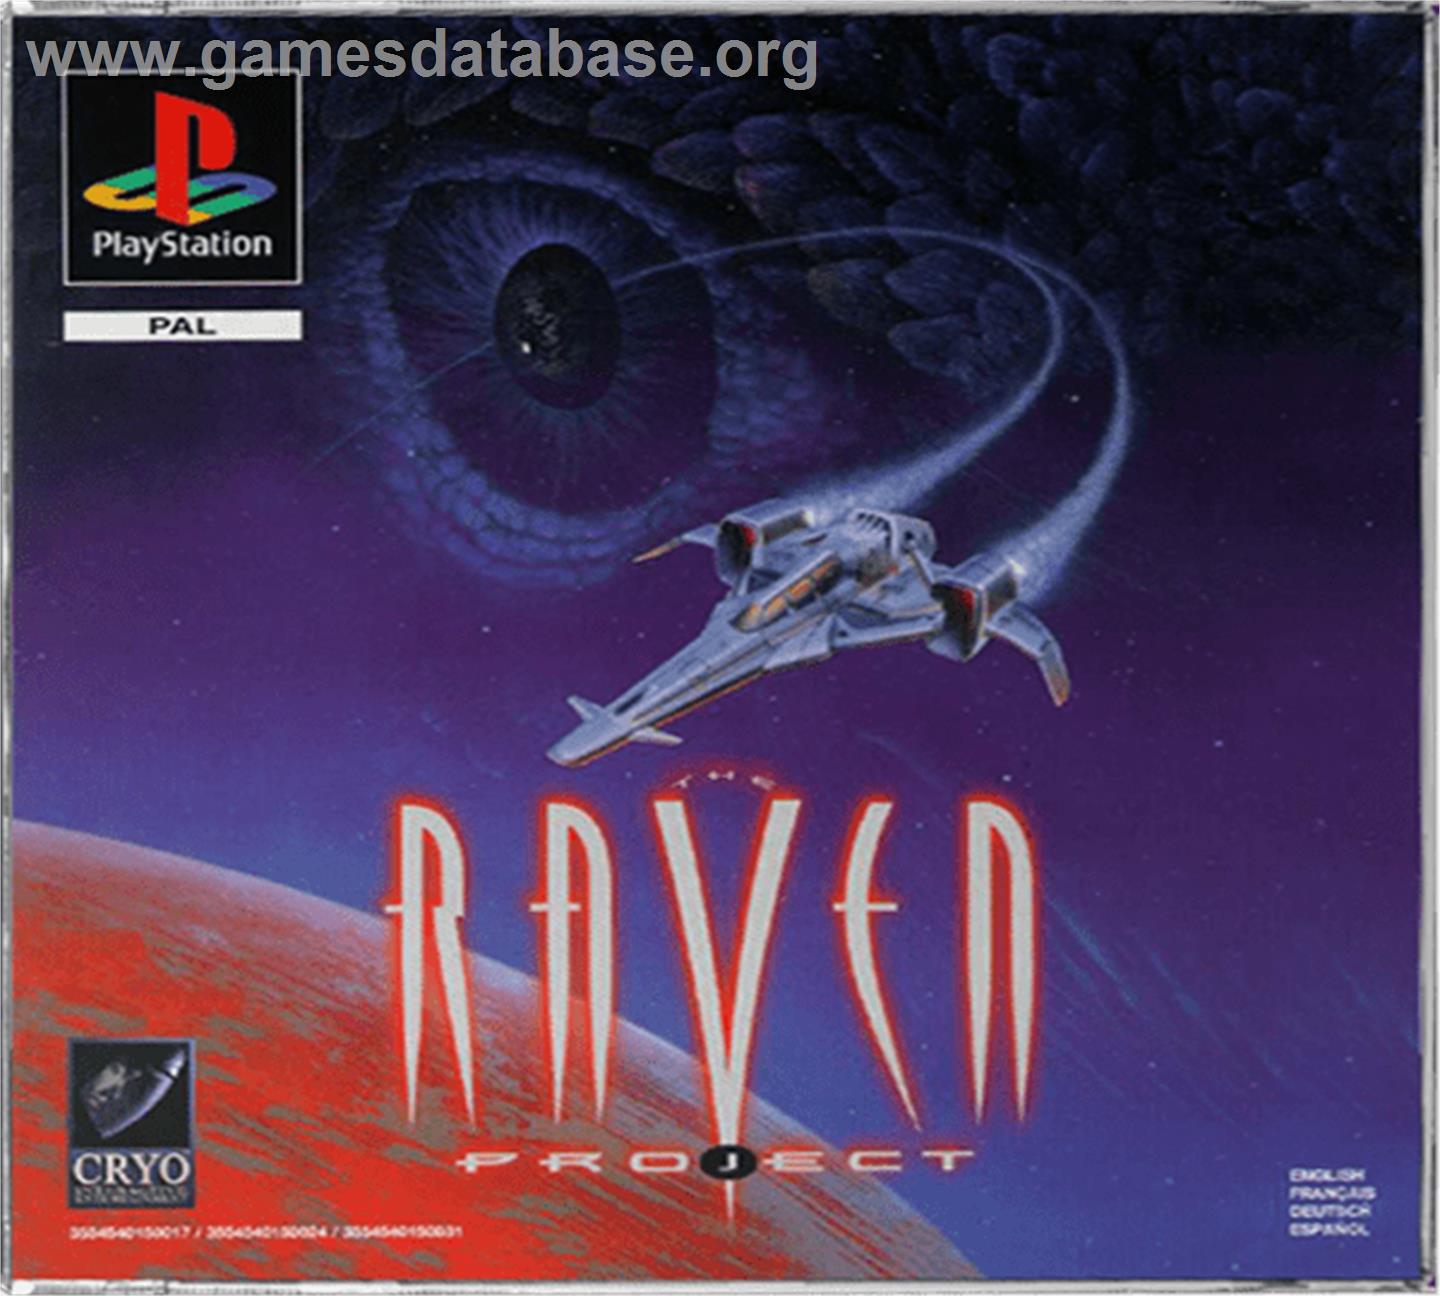 The Raven Project - Sony Playstation - Artwork - Box